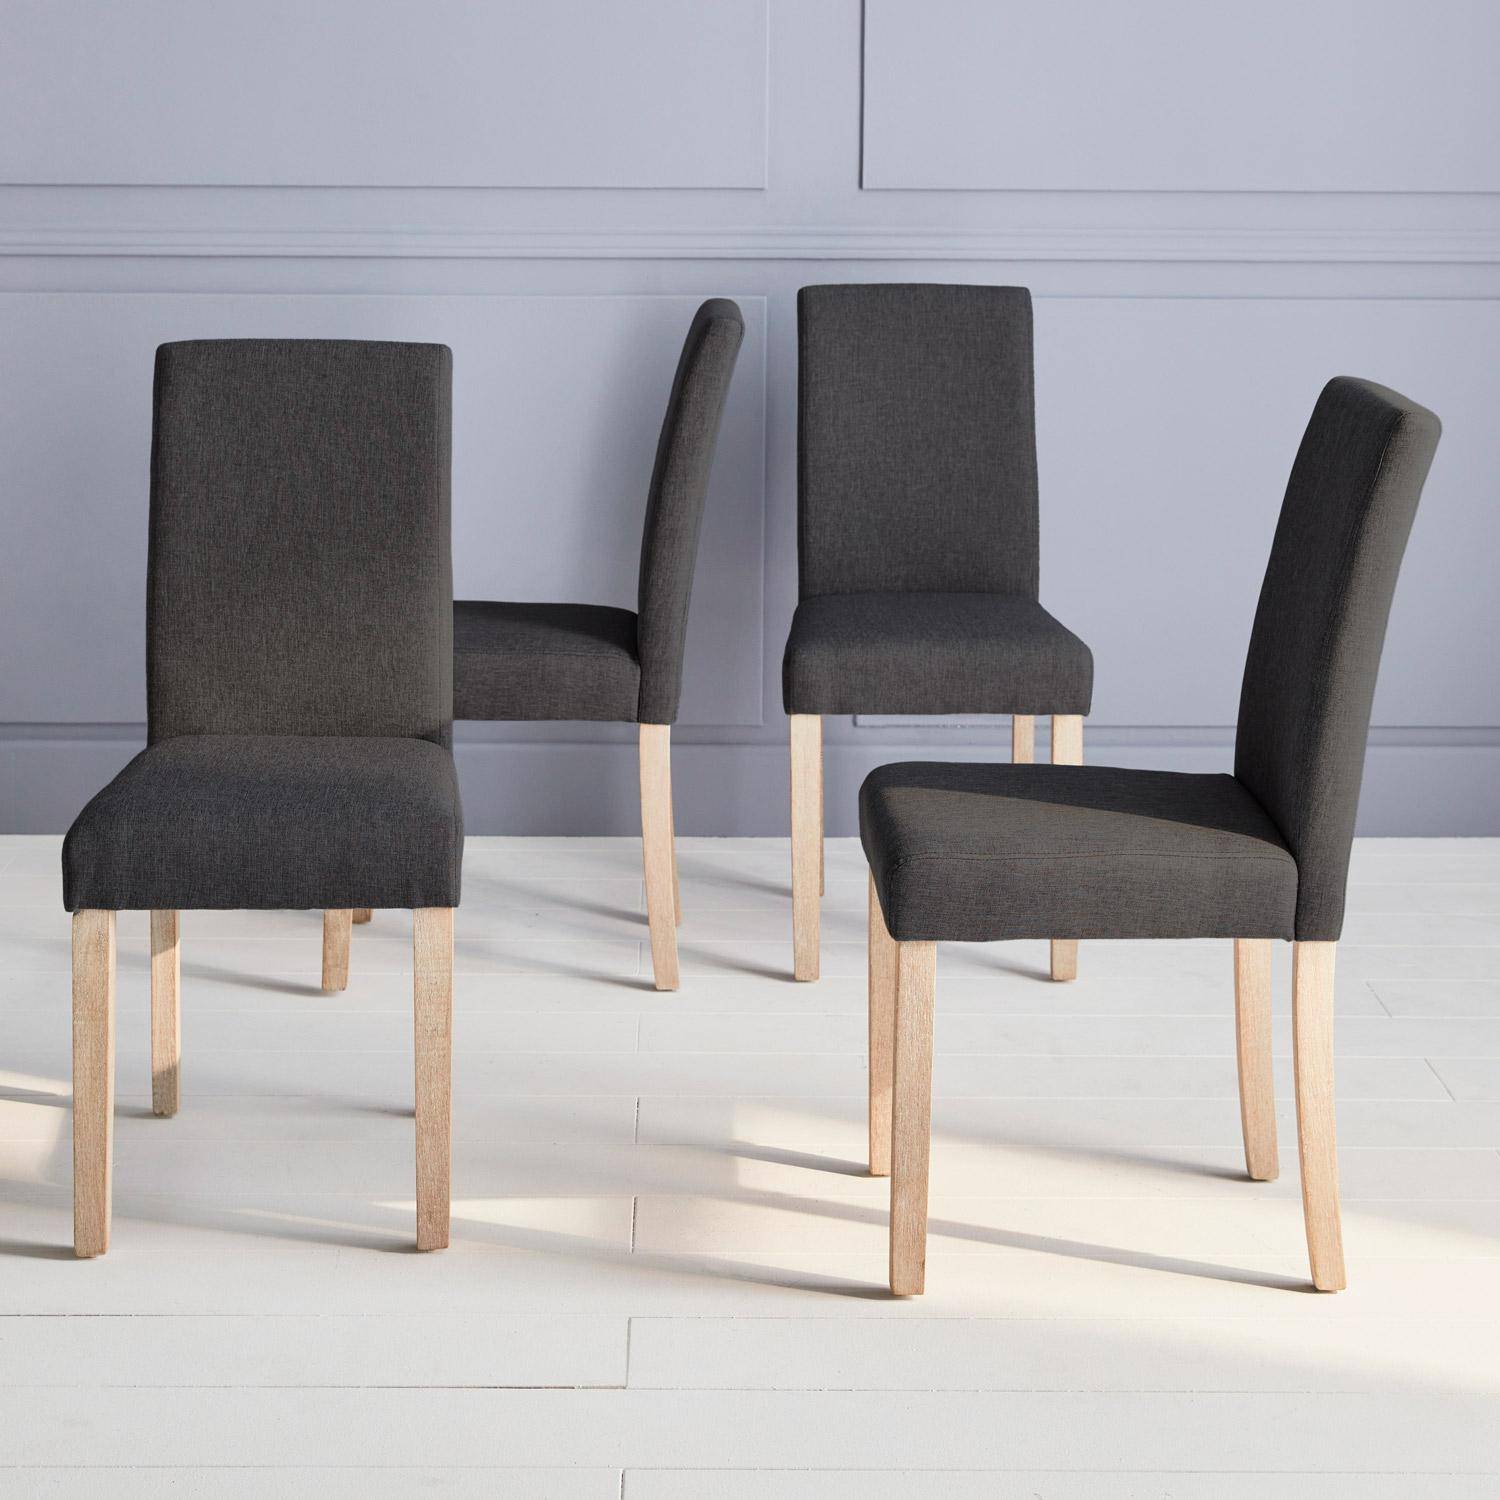 Set of 4 fabric dining chairs with wooden legs - Rita - Charcoal grey,sweeek,Photo2